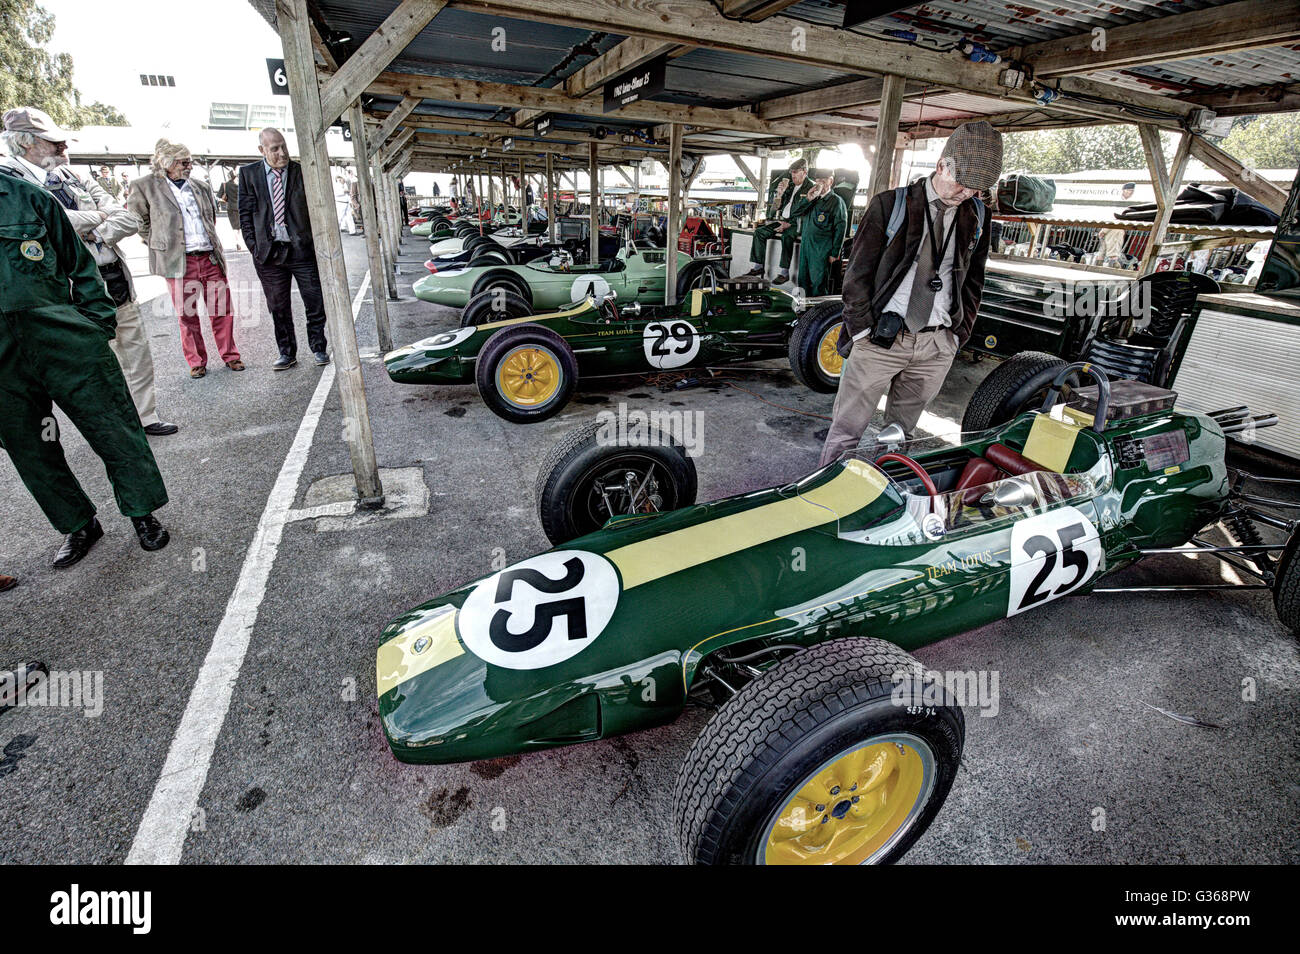 Glover Trophy entrants, early 1960's Grand Prix Lotus single-seaters in the paddock at the 2015 Goodwood Revival, Sussex, UK. Stock Photo